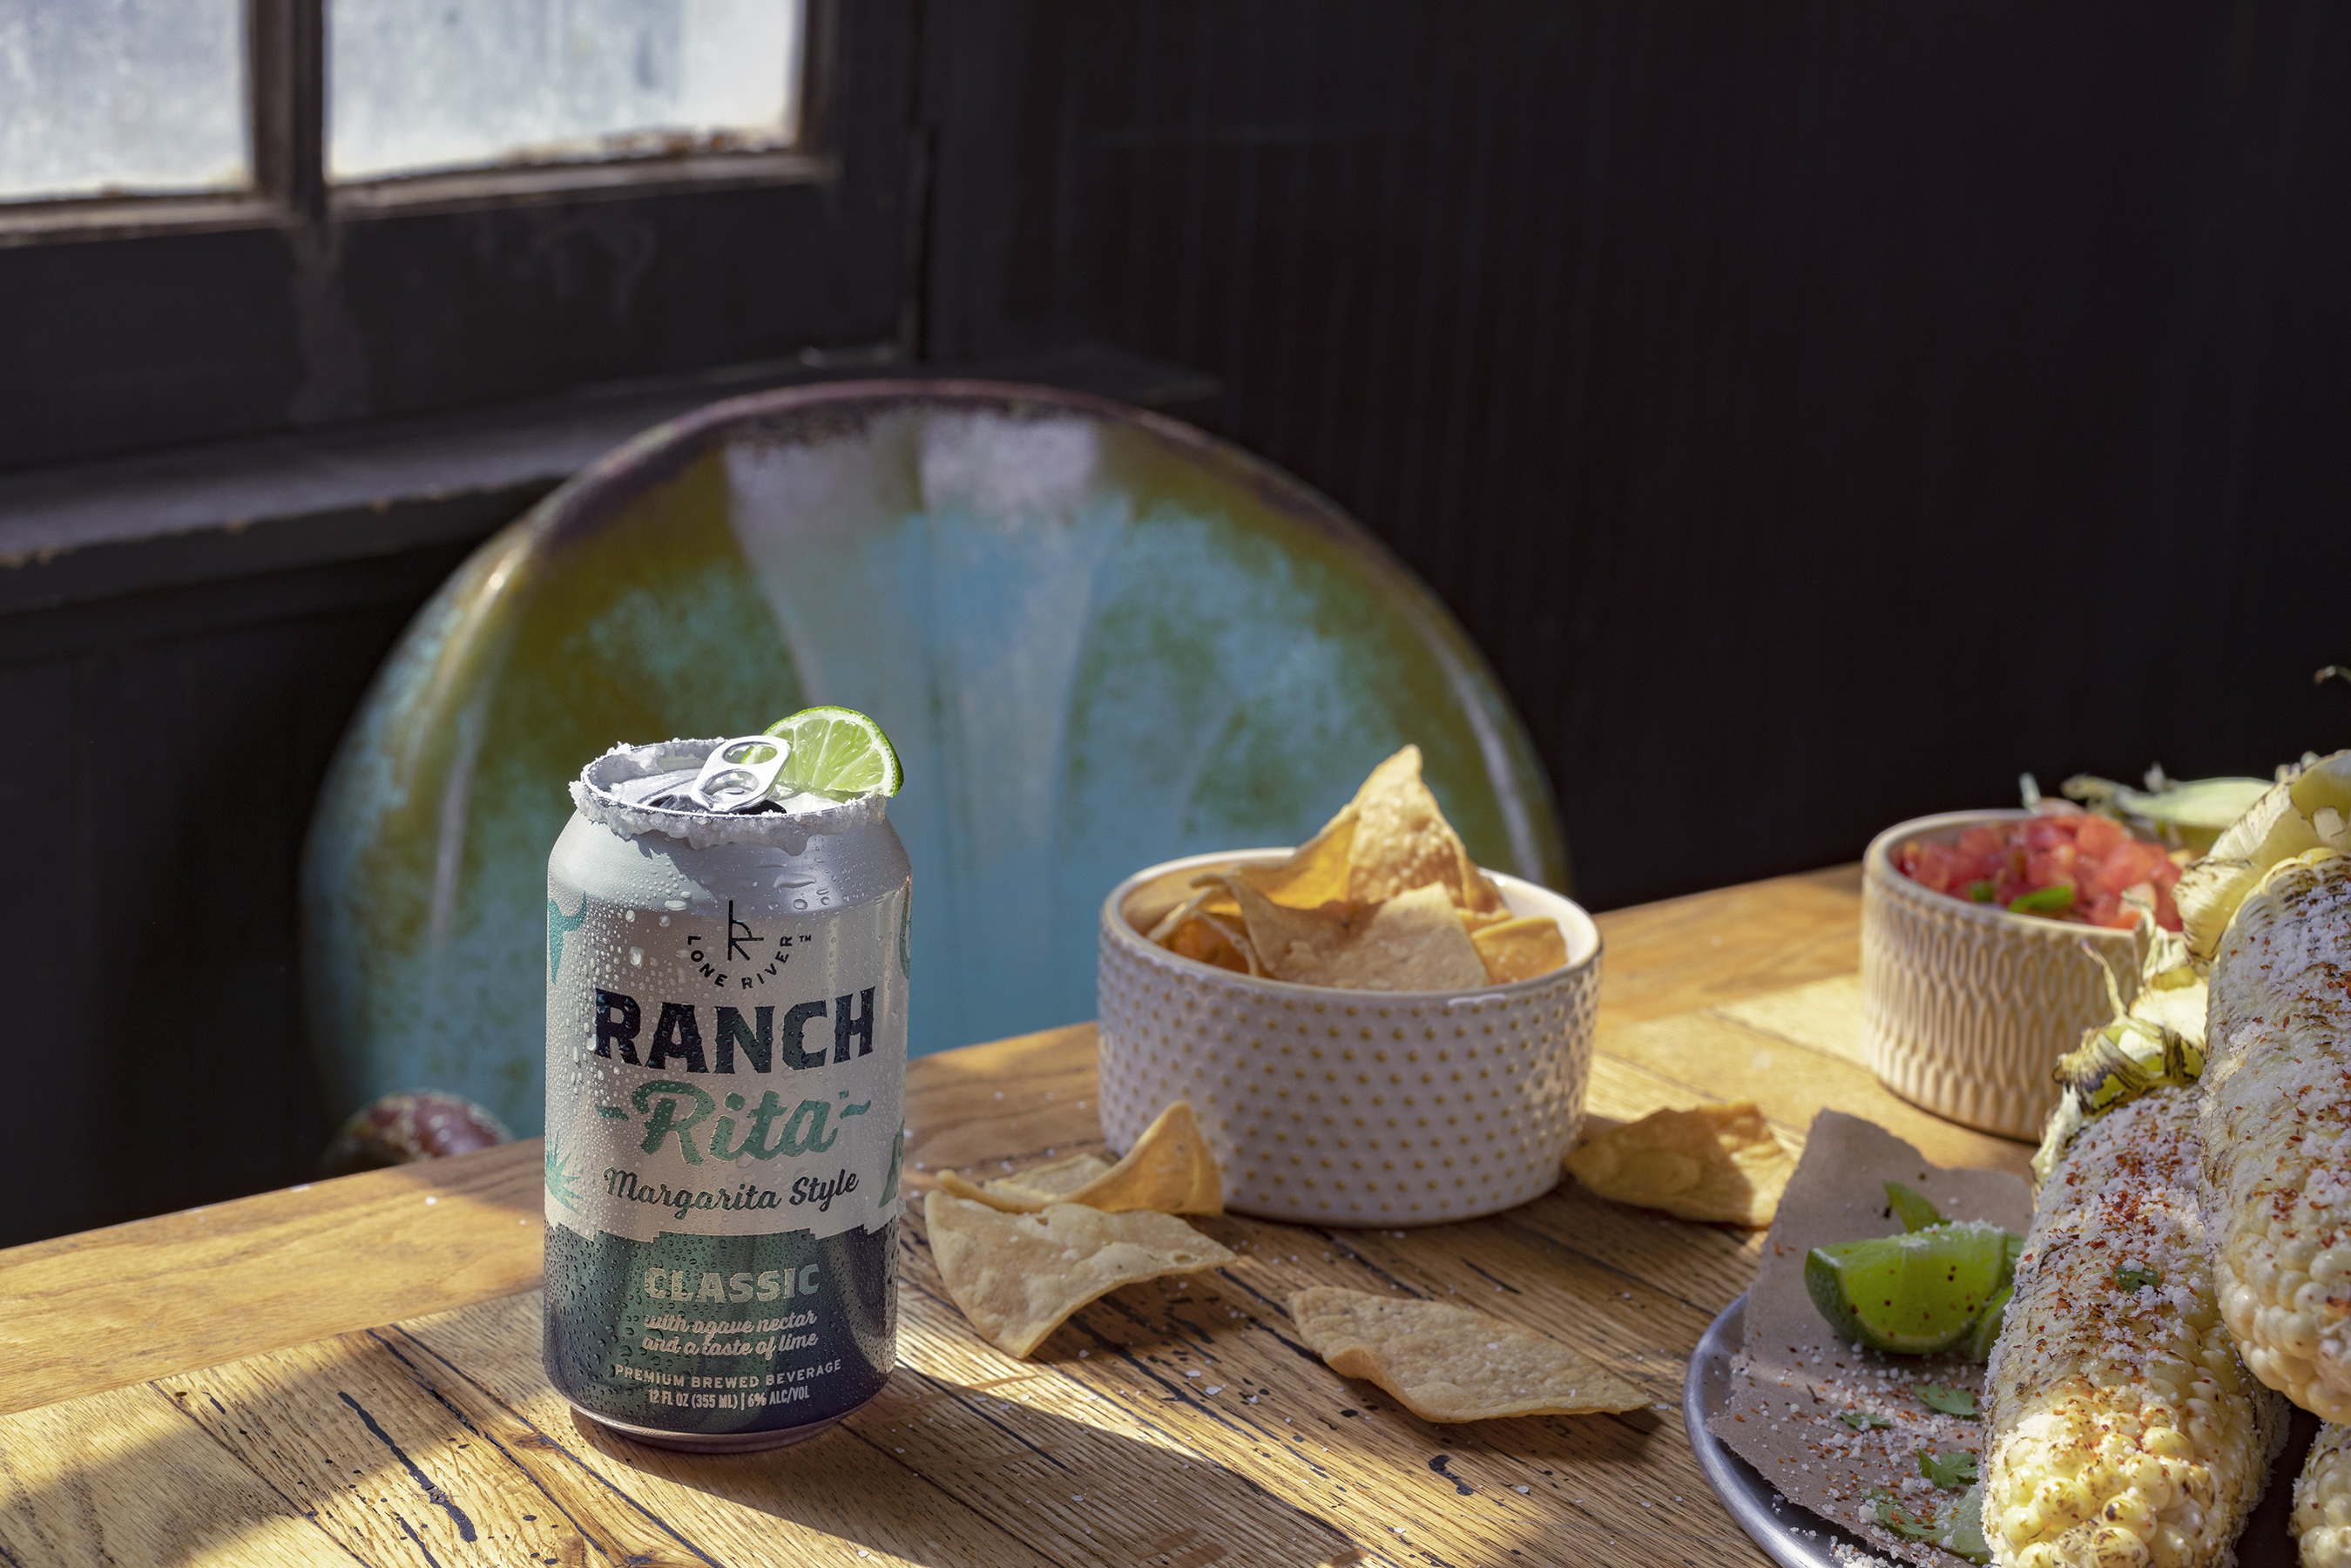 Ranch Rita is a premium take on the canned margarita style beverage, with quality ingredients, fuller flavor and a 6% ABV.